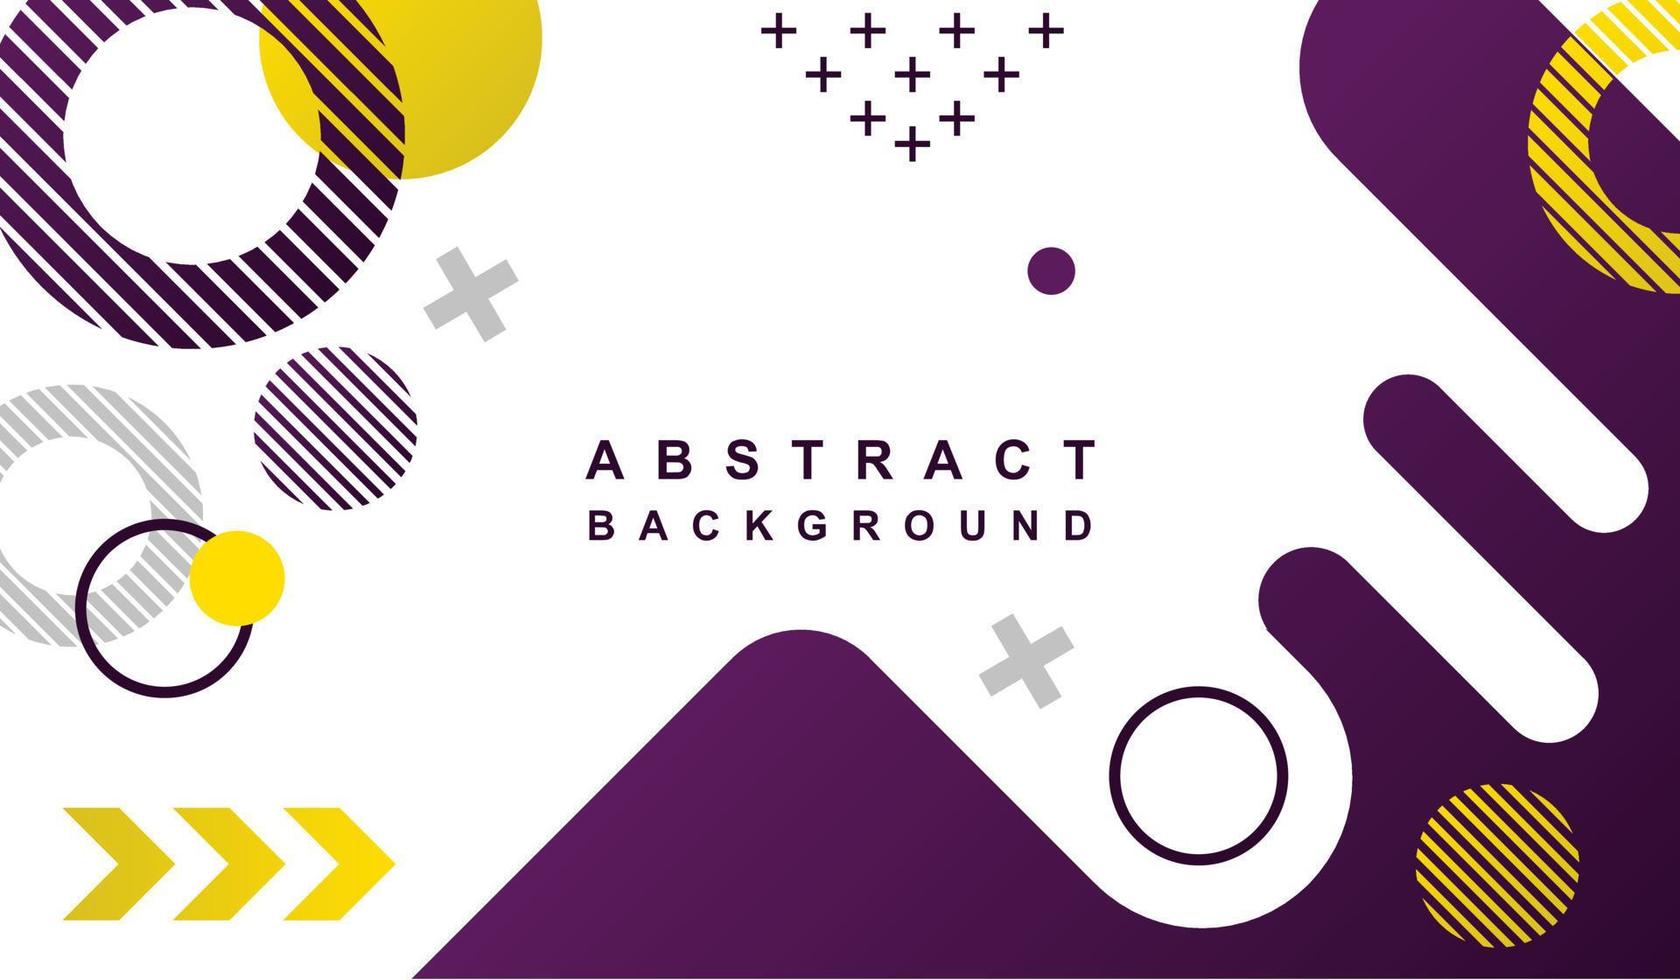 abstract geometric shapes background with purple and yellow colors vector